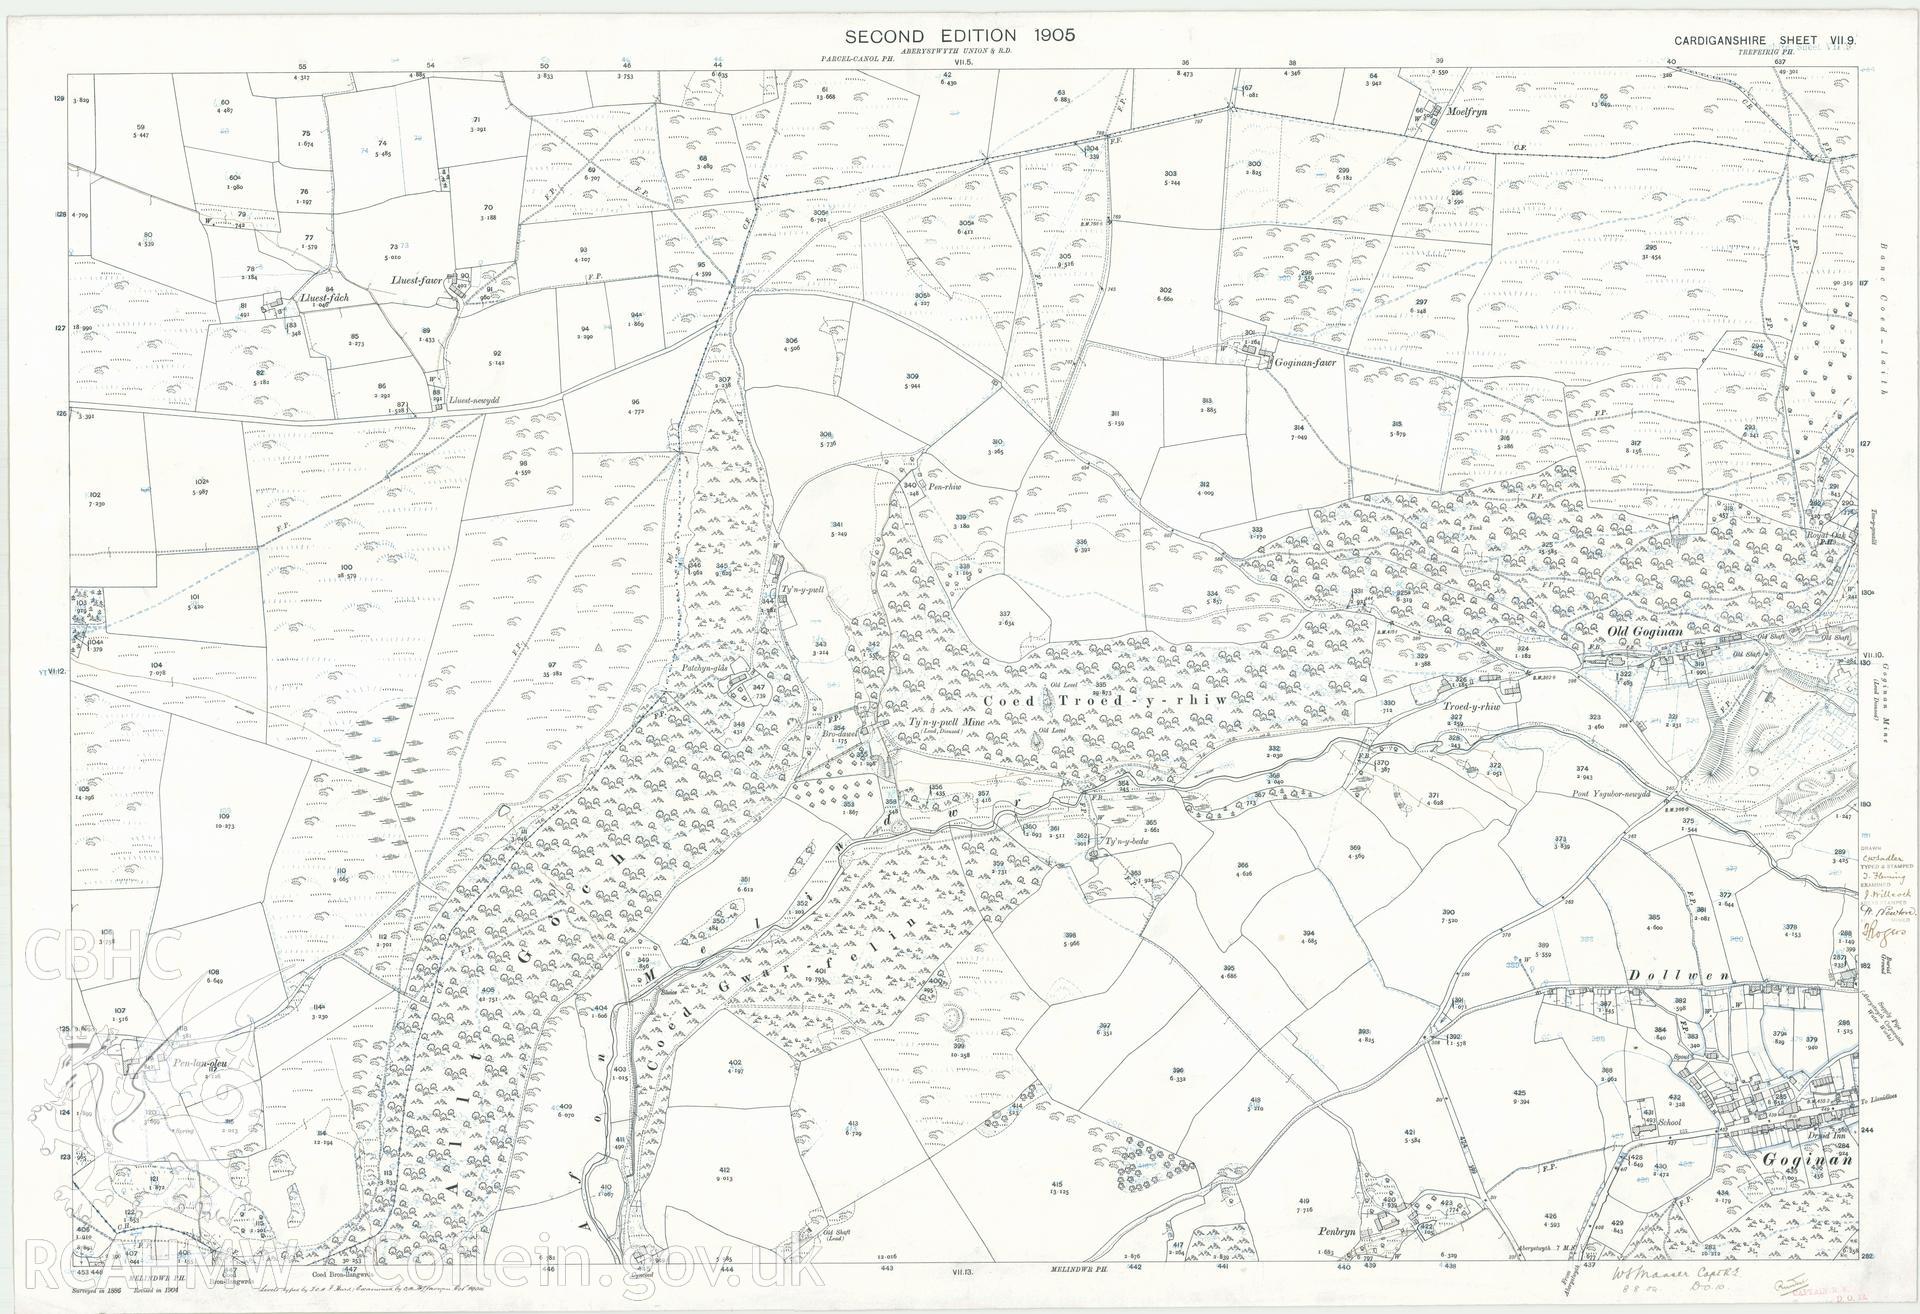 Digital copy of a Second Edition 1906 Ordnance Survey map covering the Goginan area